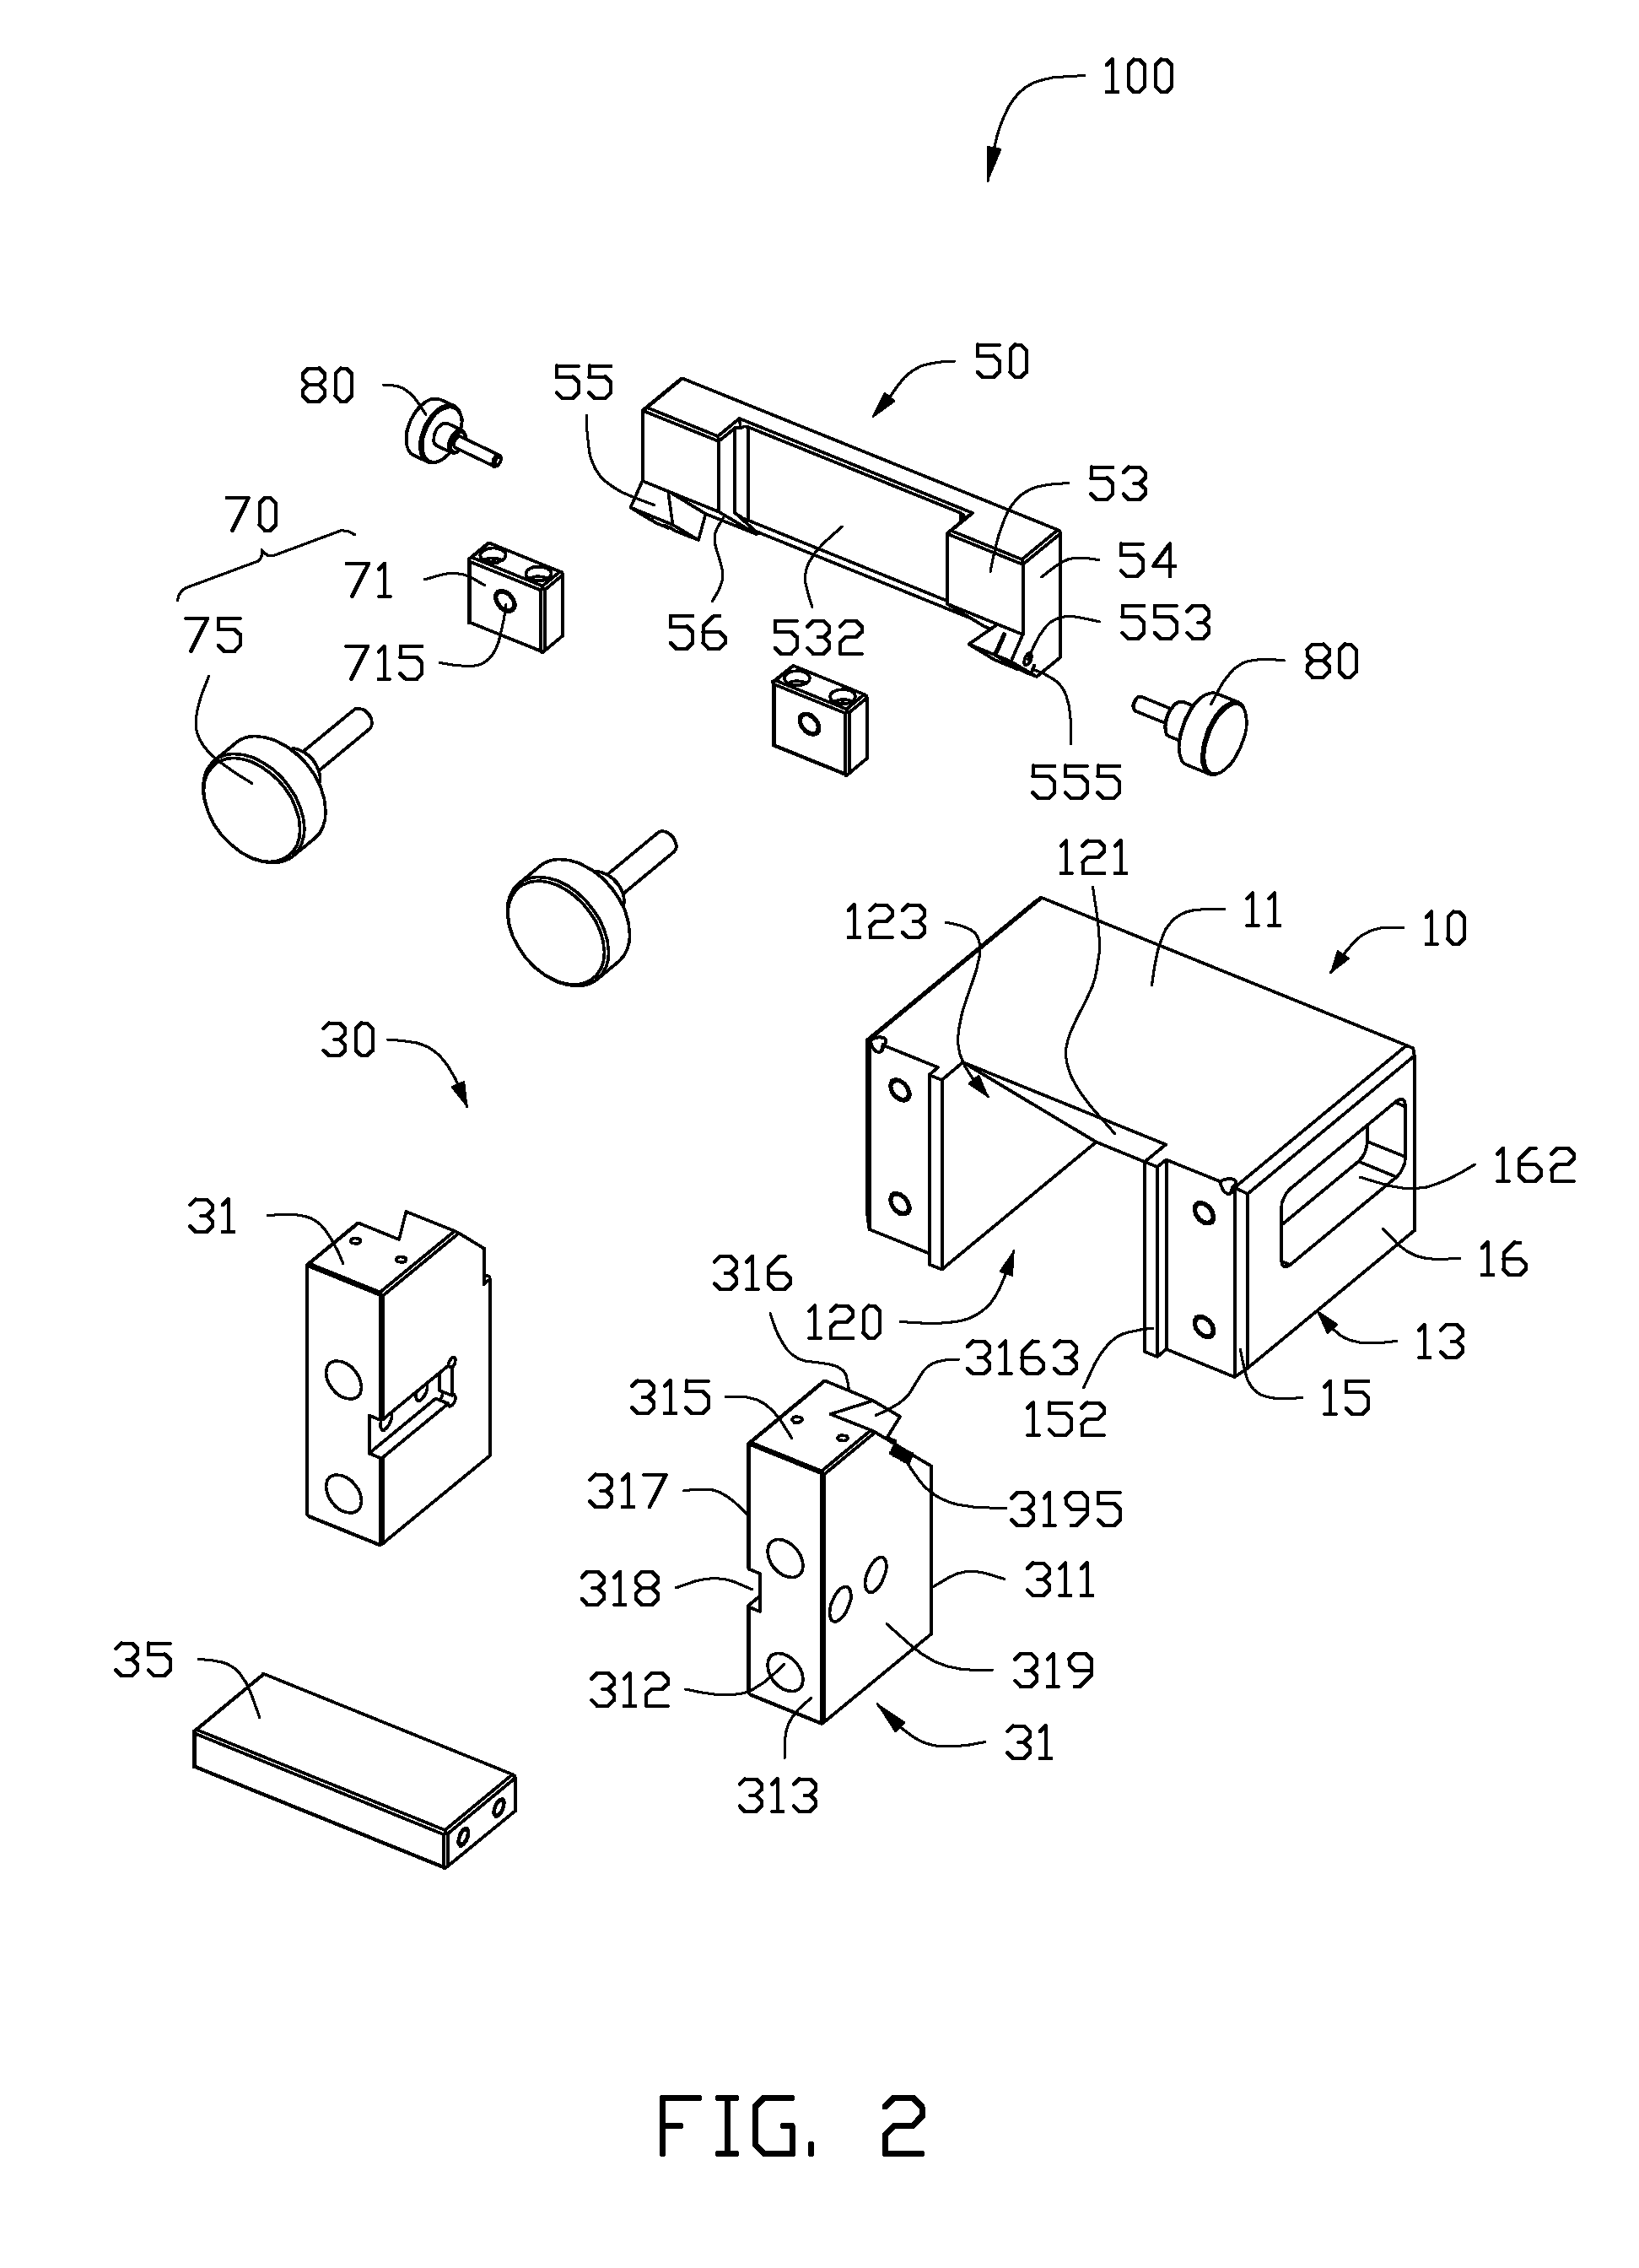 Arc surface milling assistant processing device